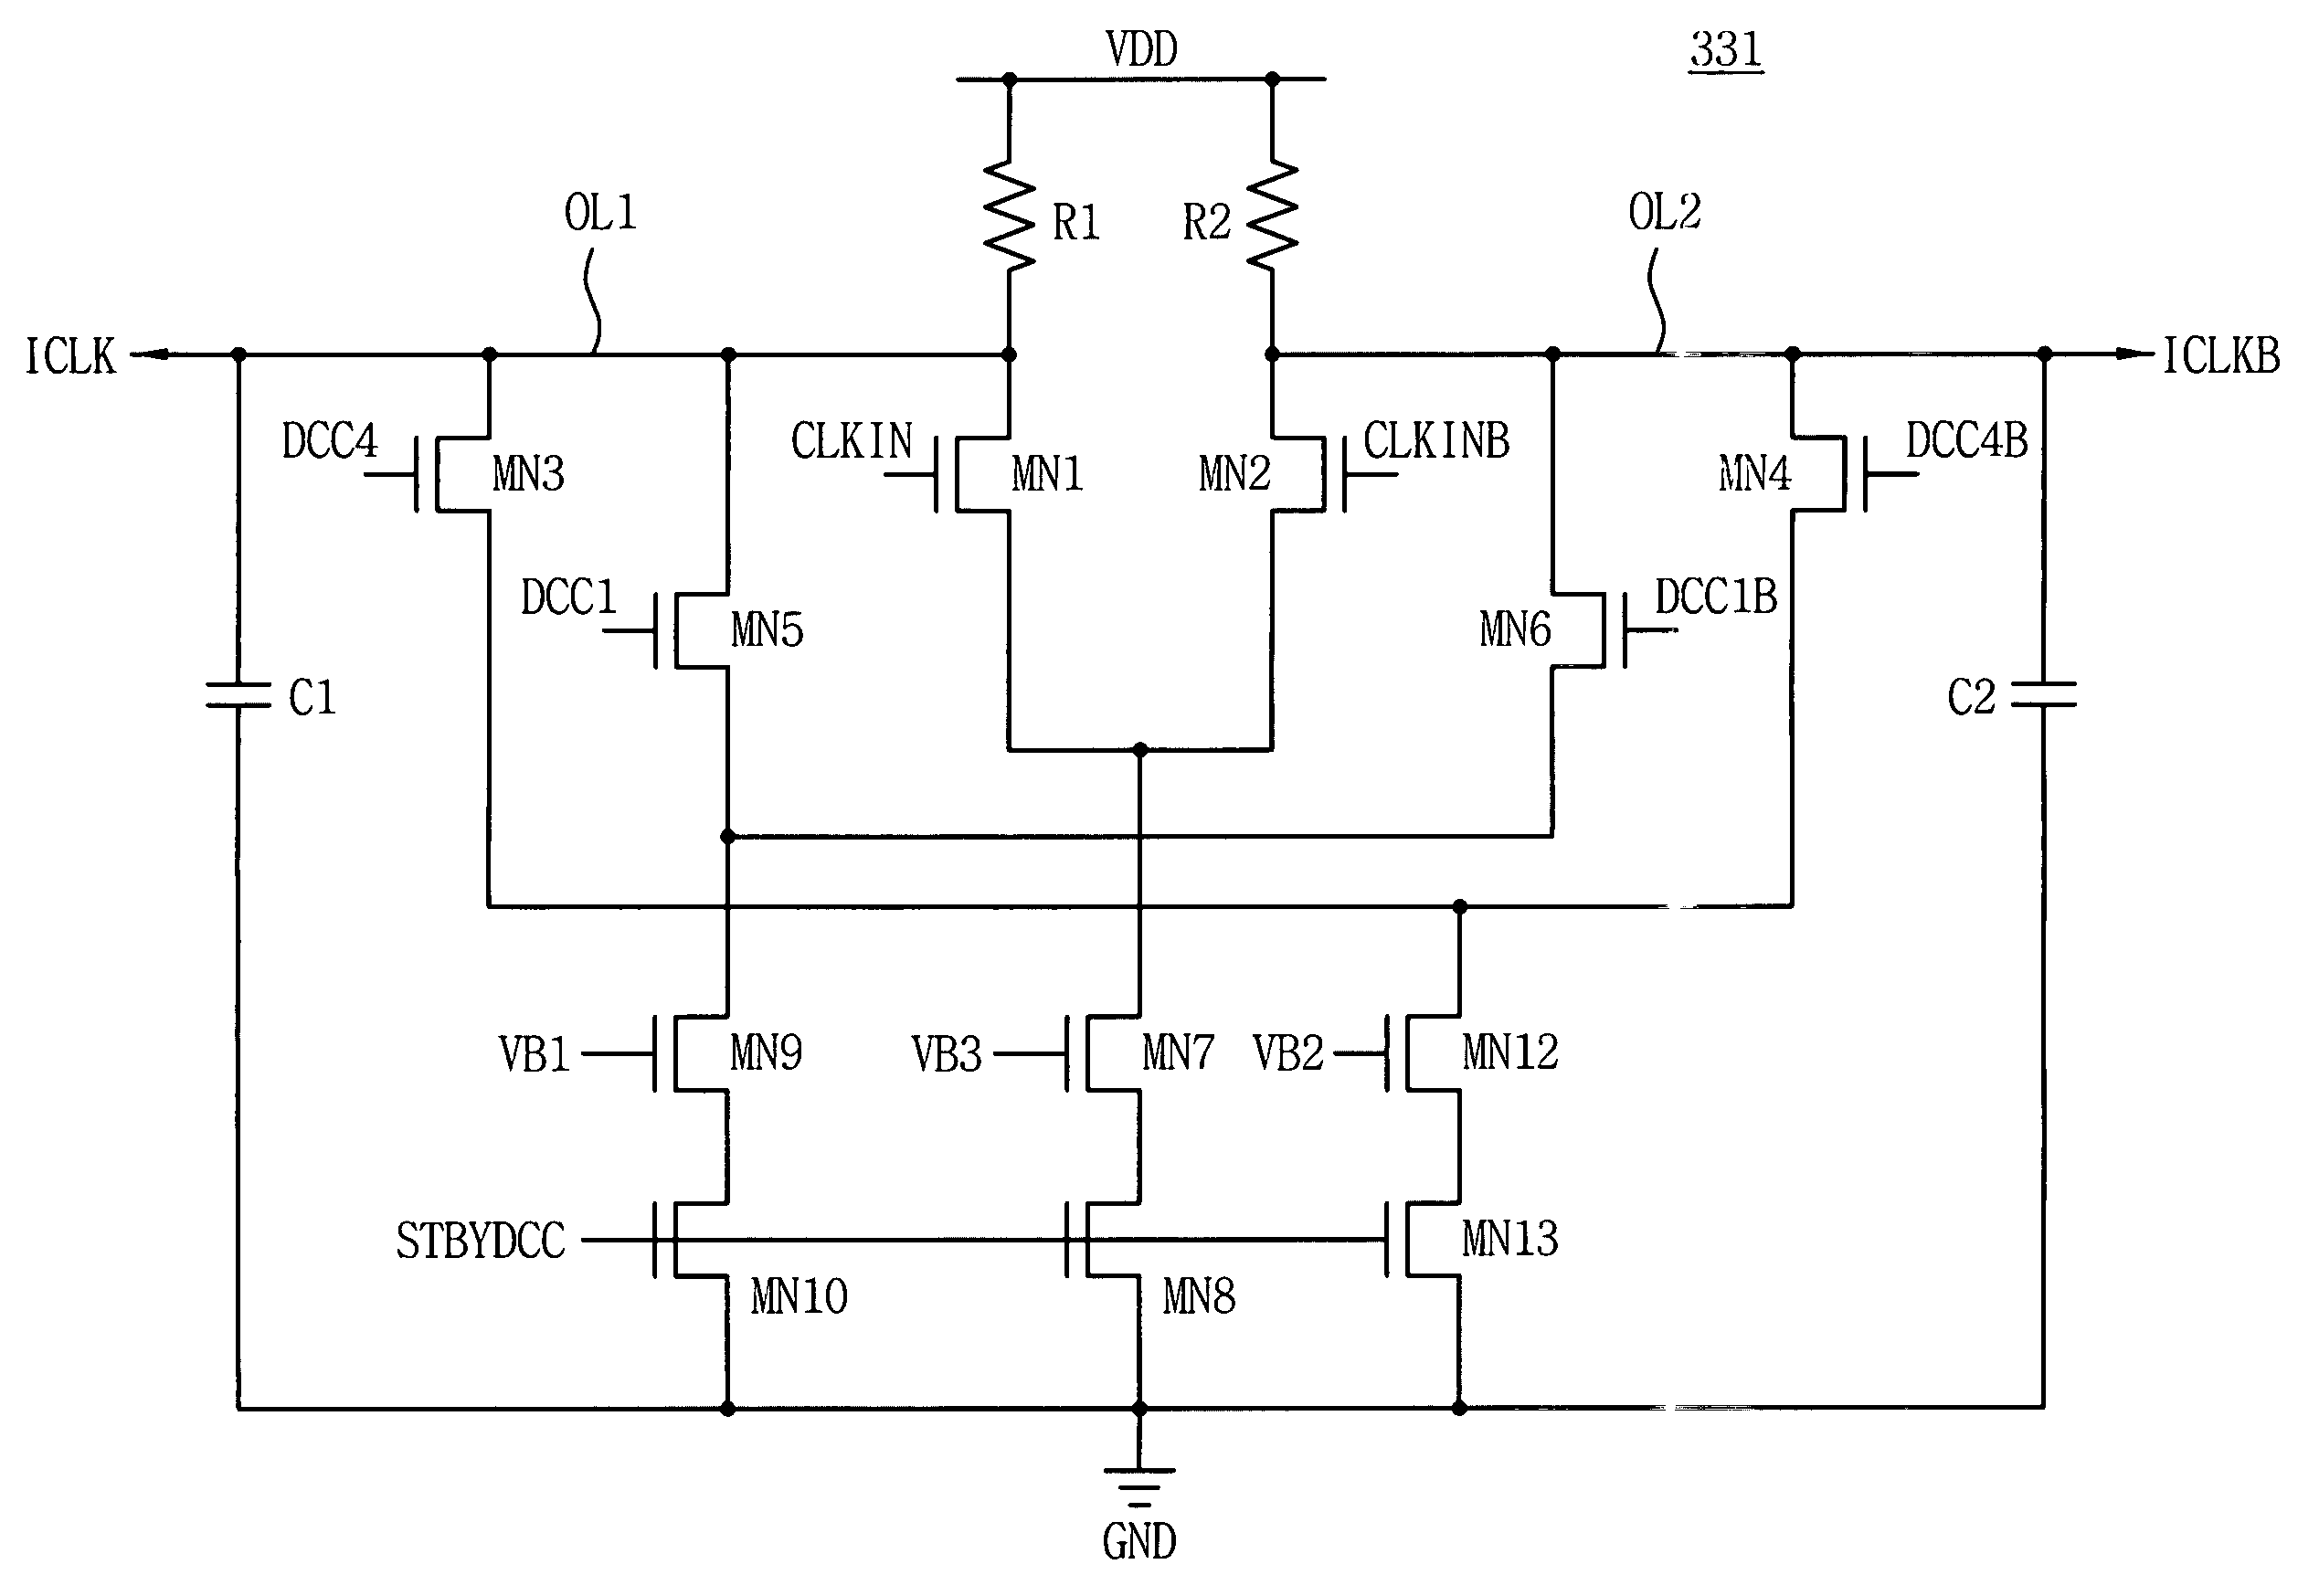 Duty cycle correction circuits suitable for use in delay-locked loops and methods of correcting duty cycles of periodic signals